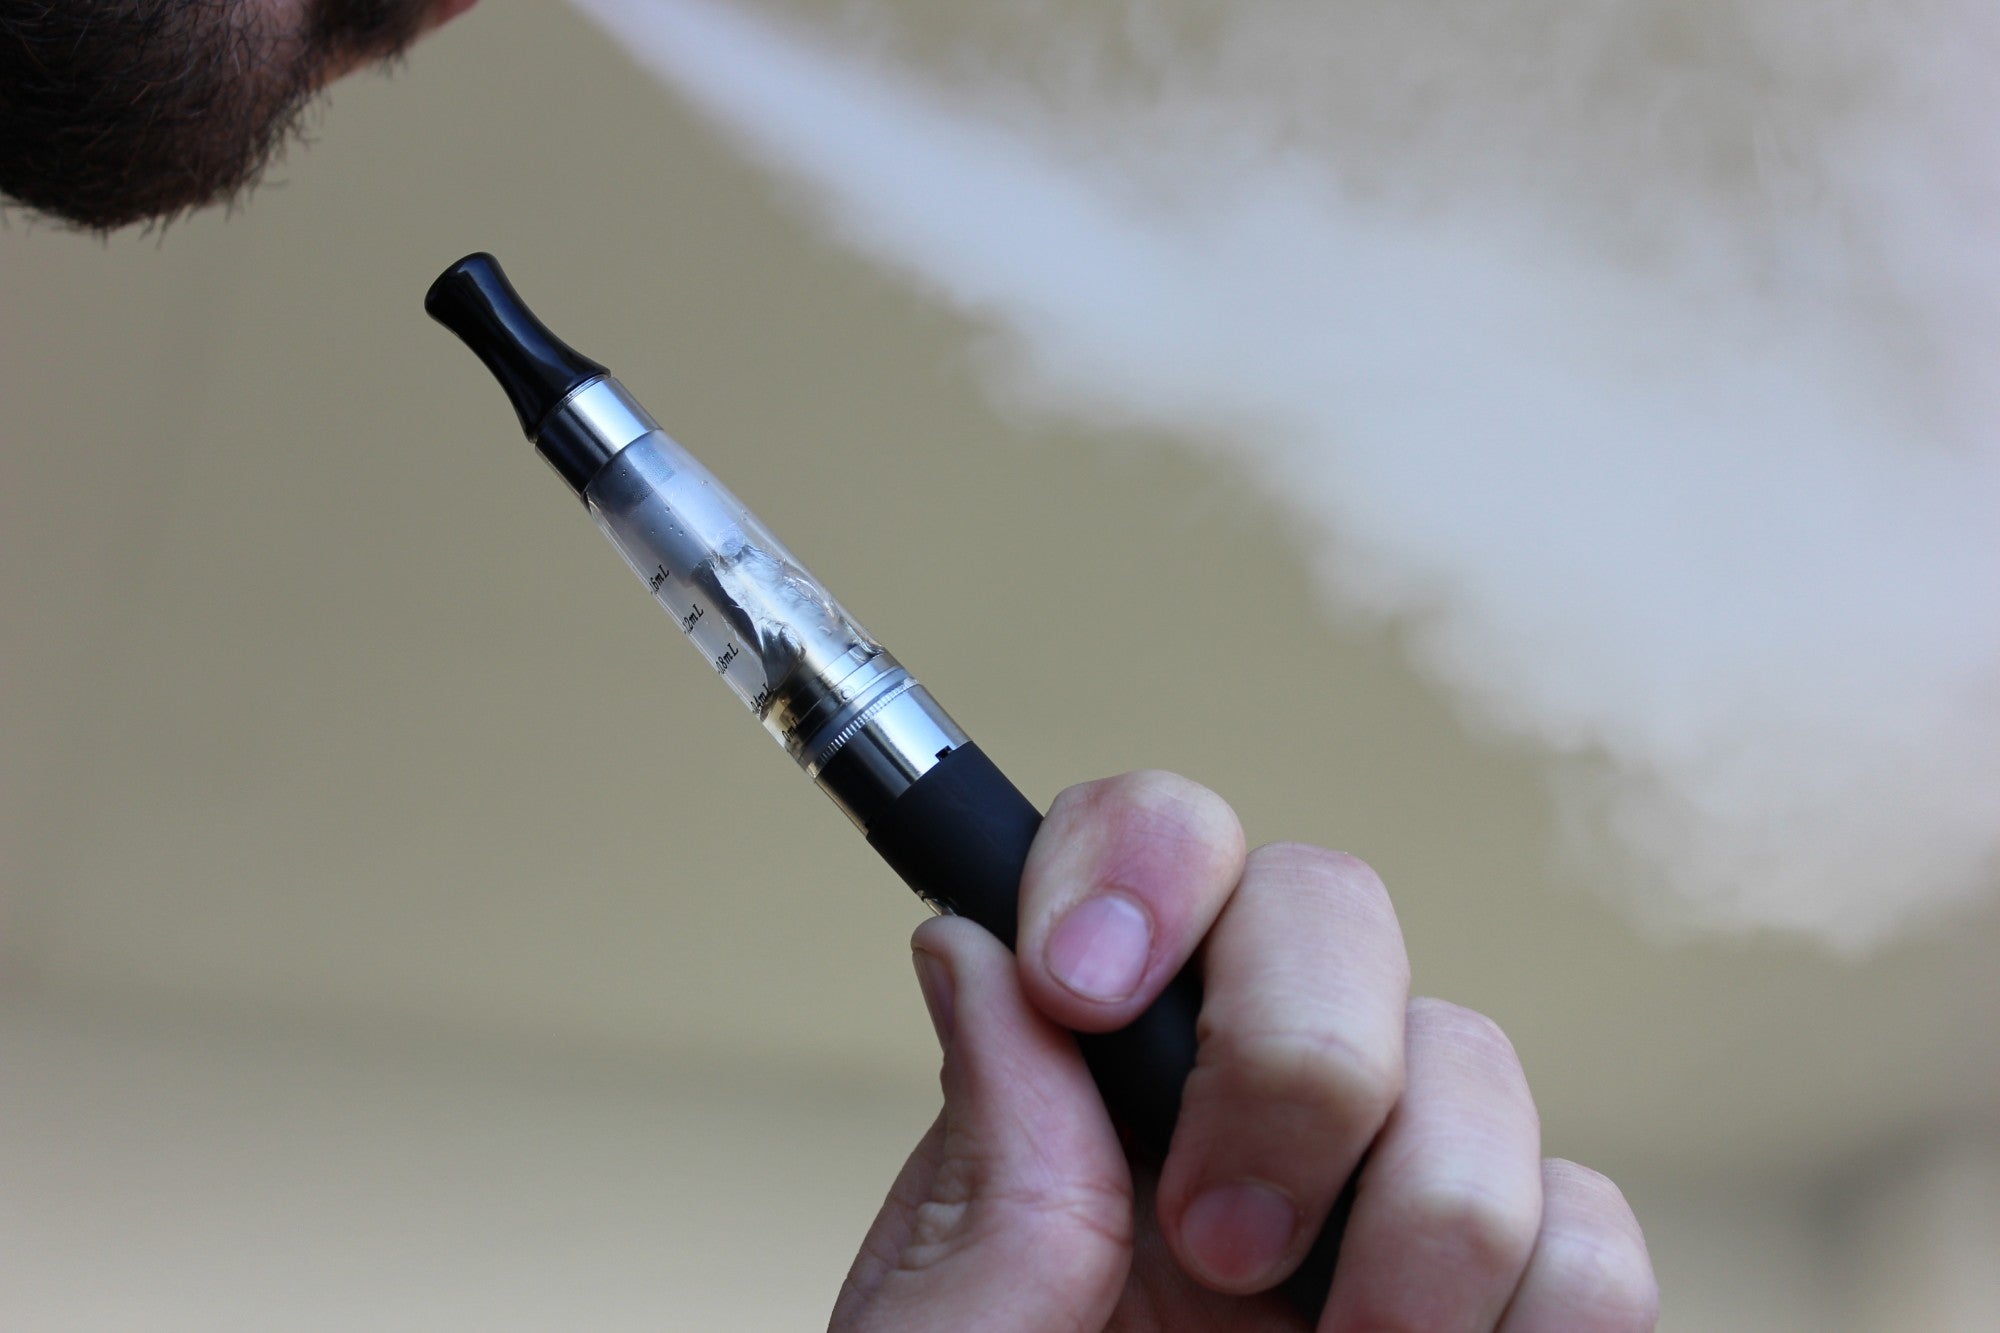 Bigger Vape Clouds: How to Get Massive Clouds of Vapor from Your Vape